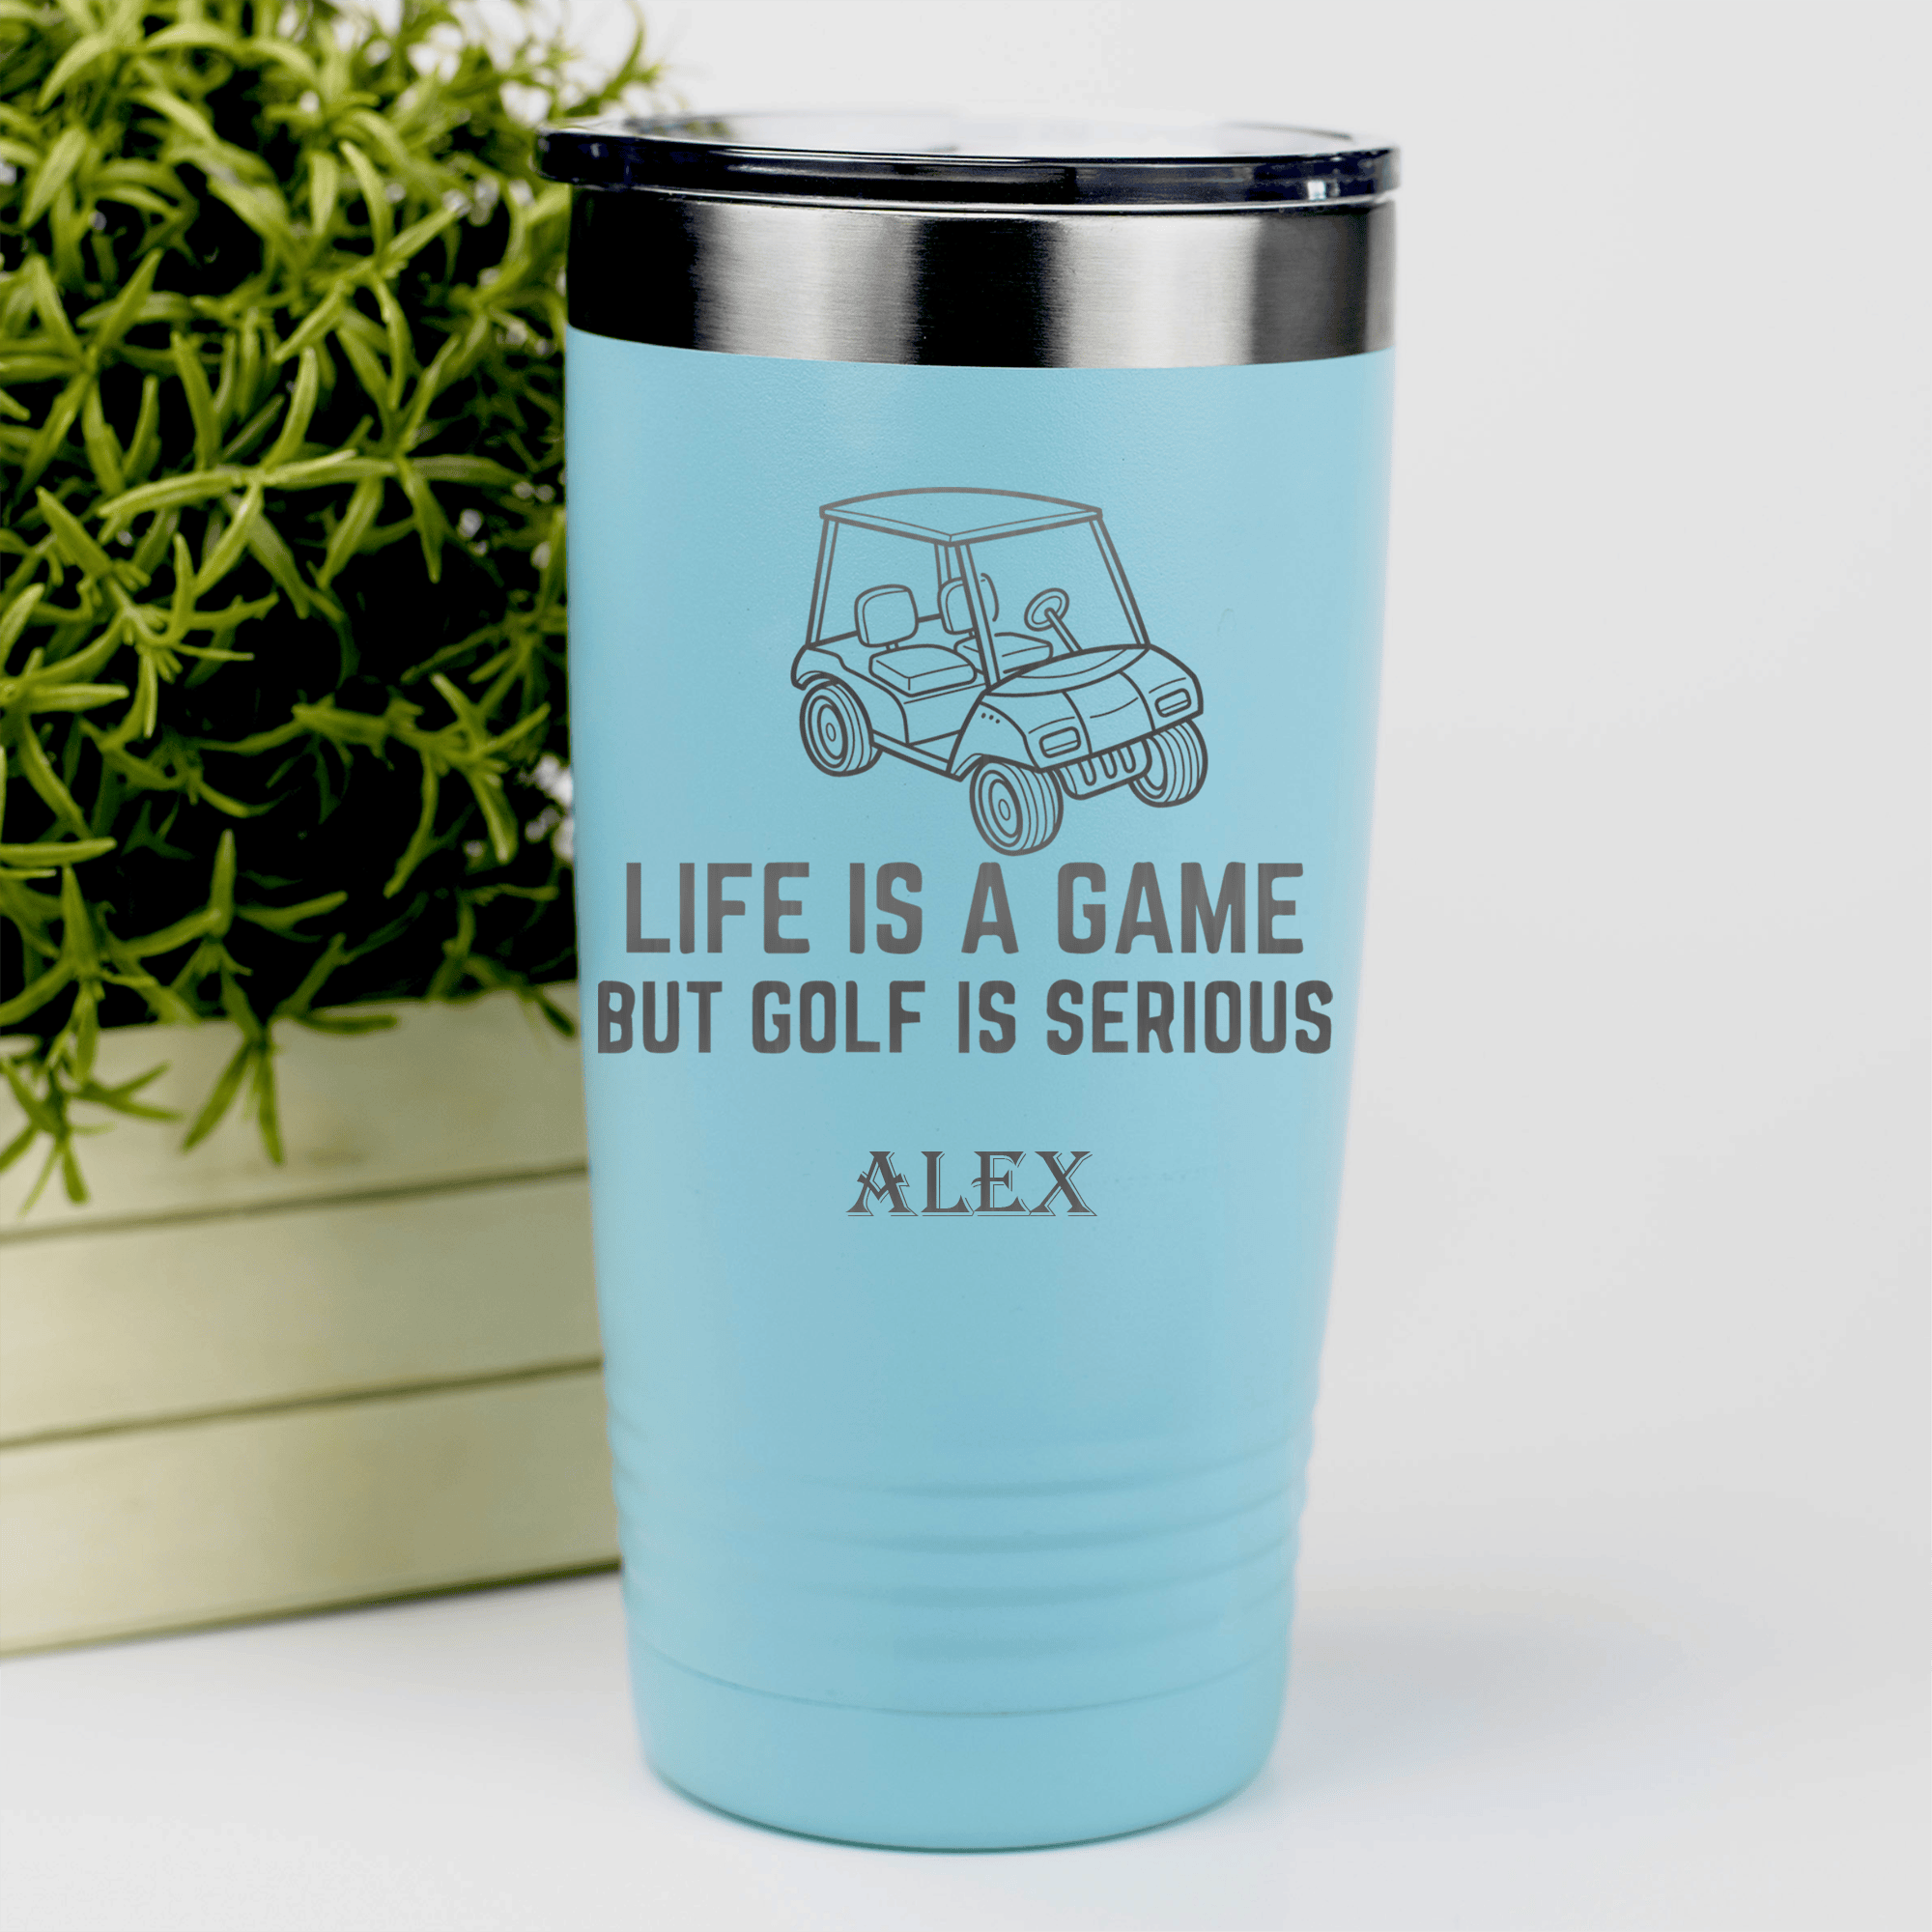 Teal Golf Tumbler With Life Is A Game Design